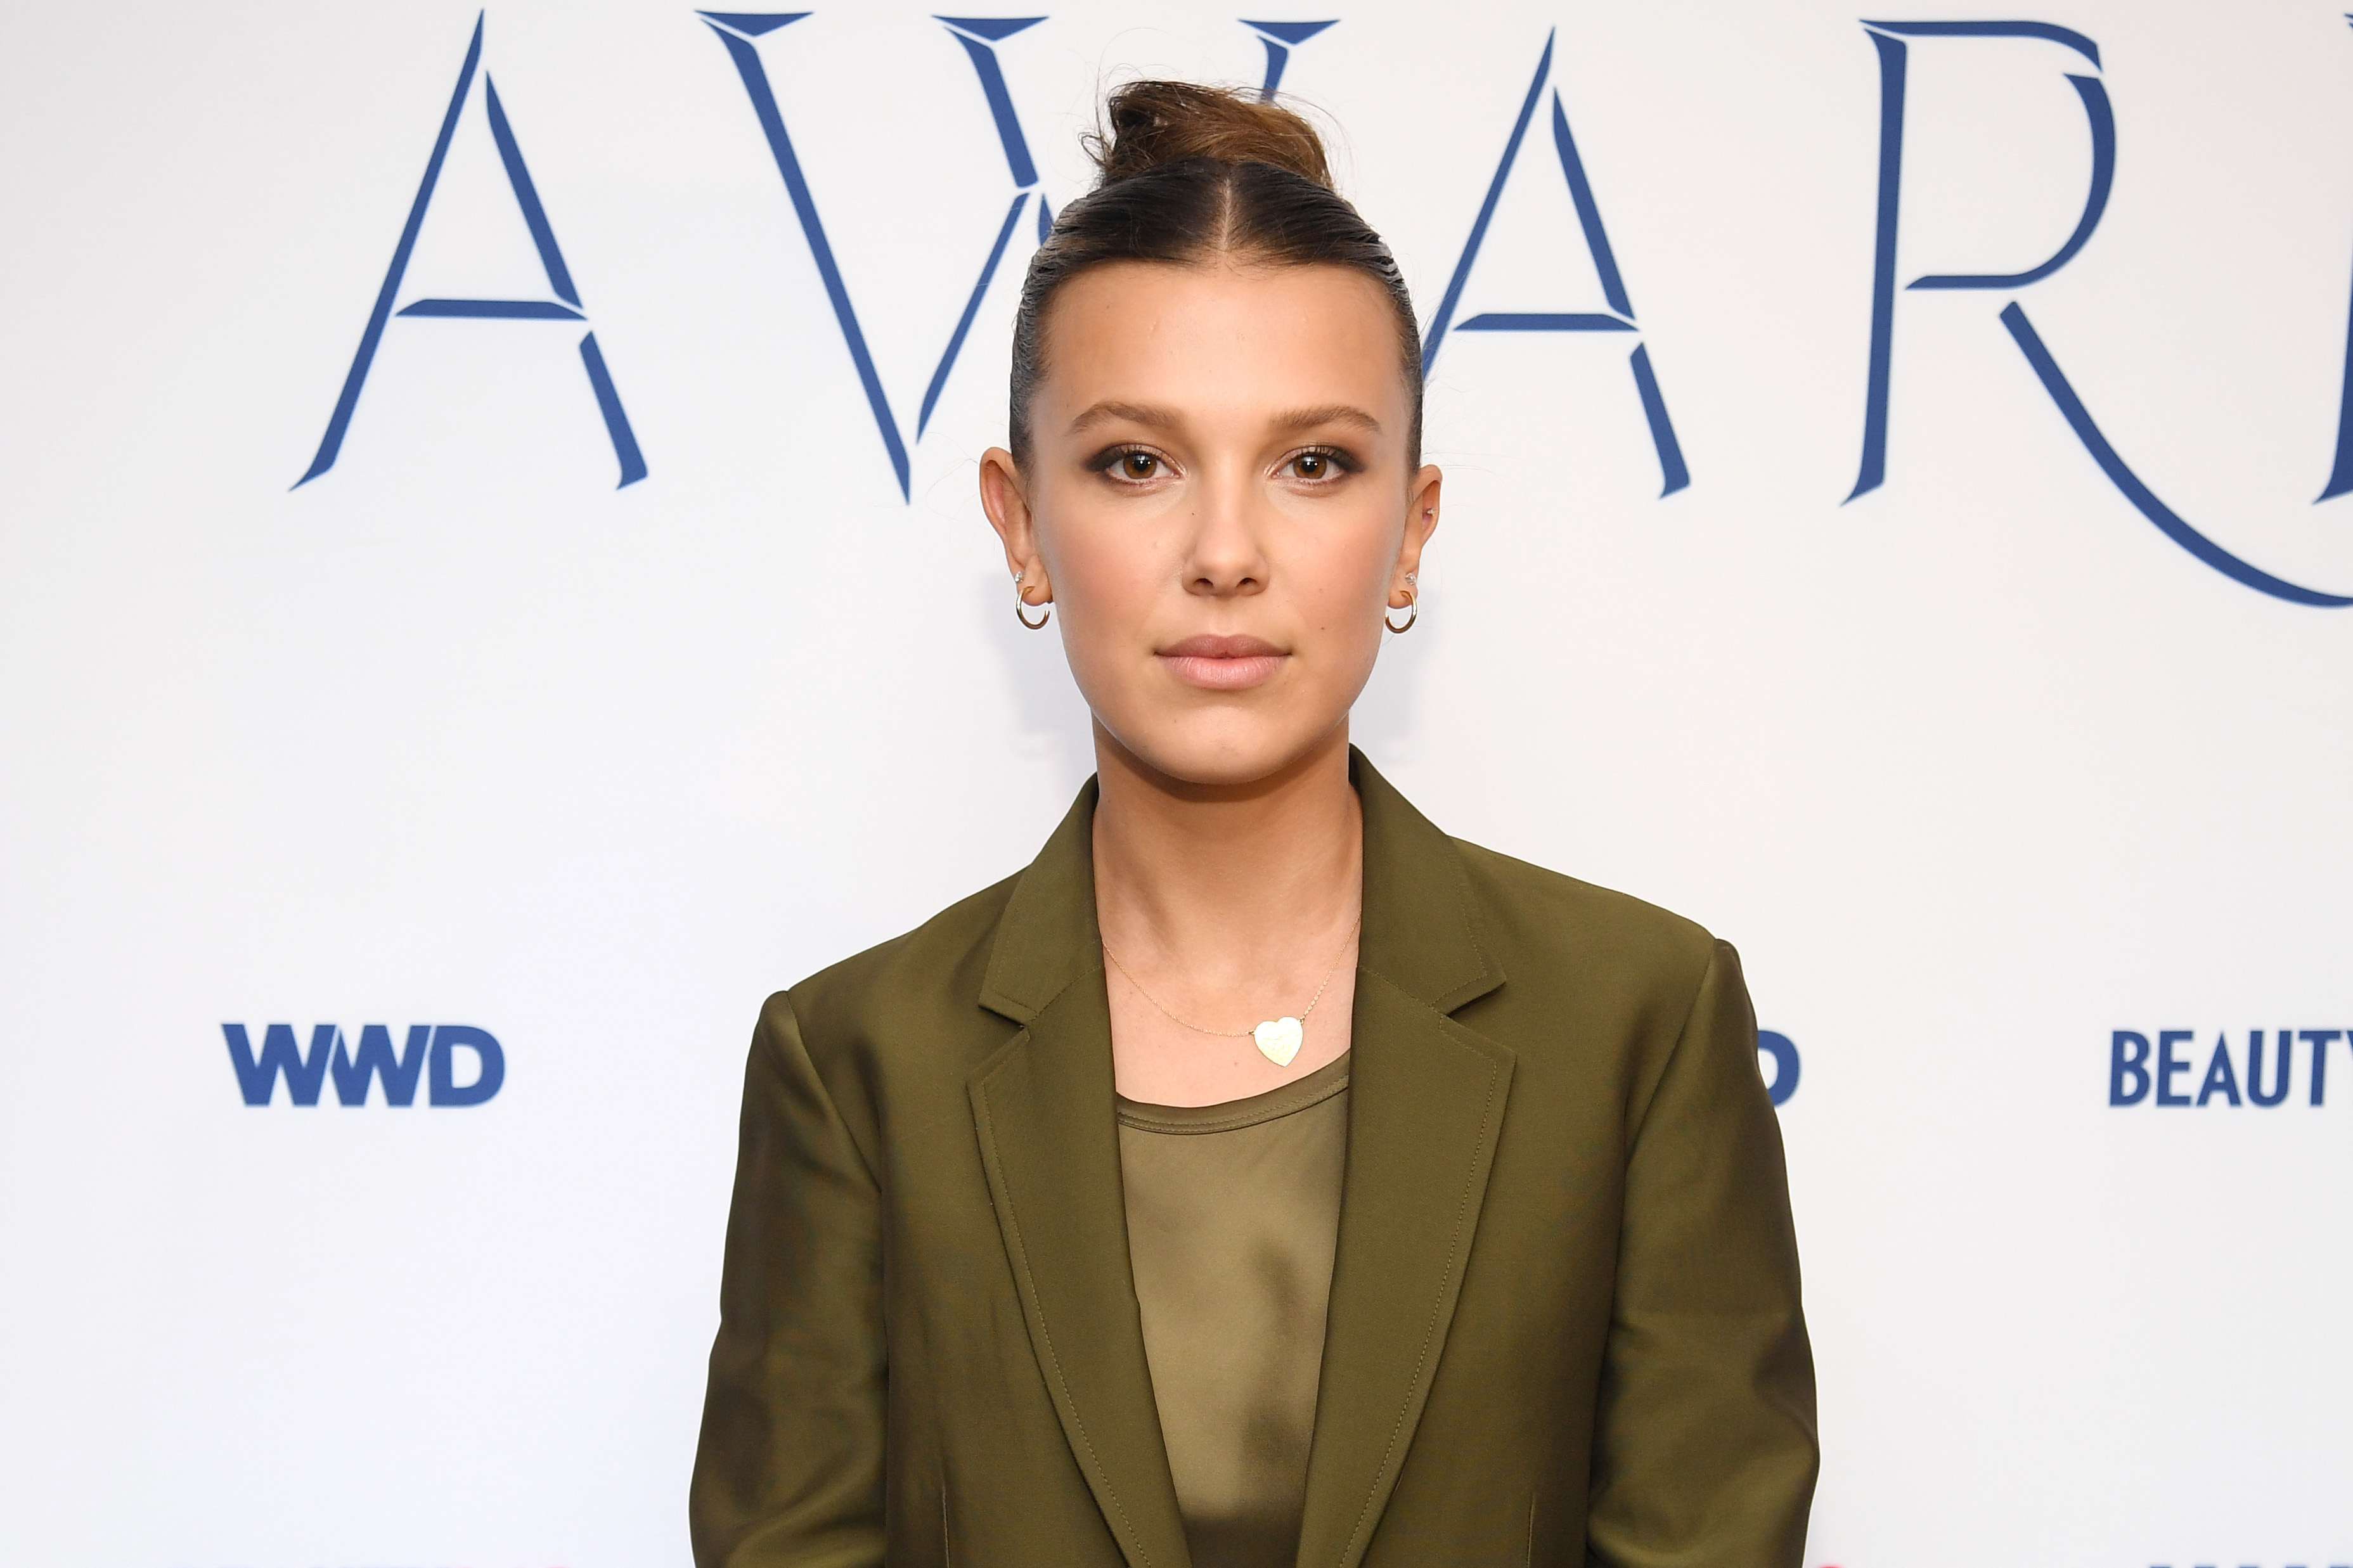 Millie Bobby Brown Details Alleged Relationship With Hunter Ecimovic